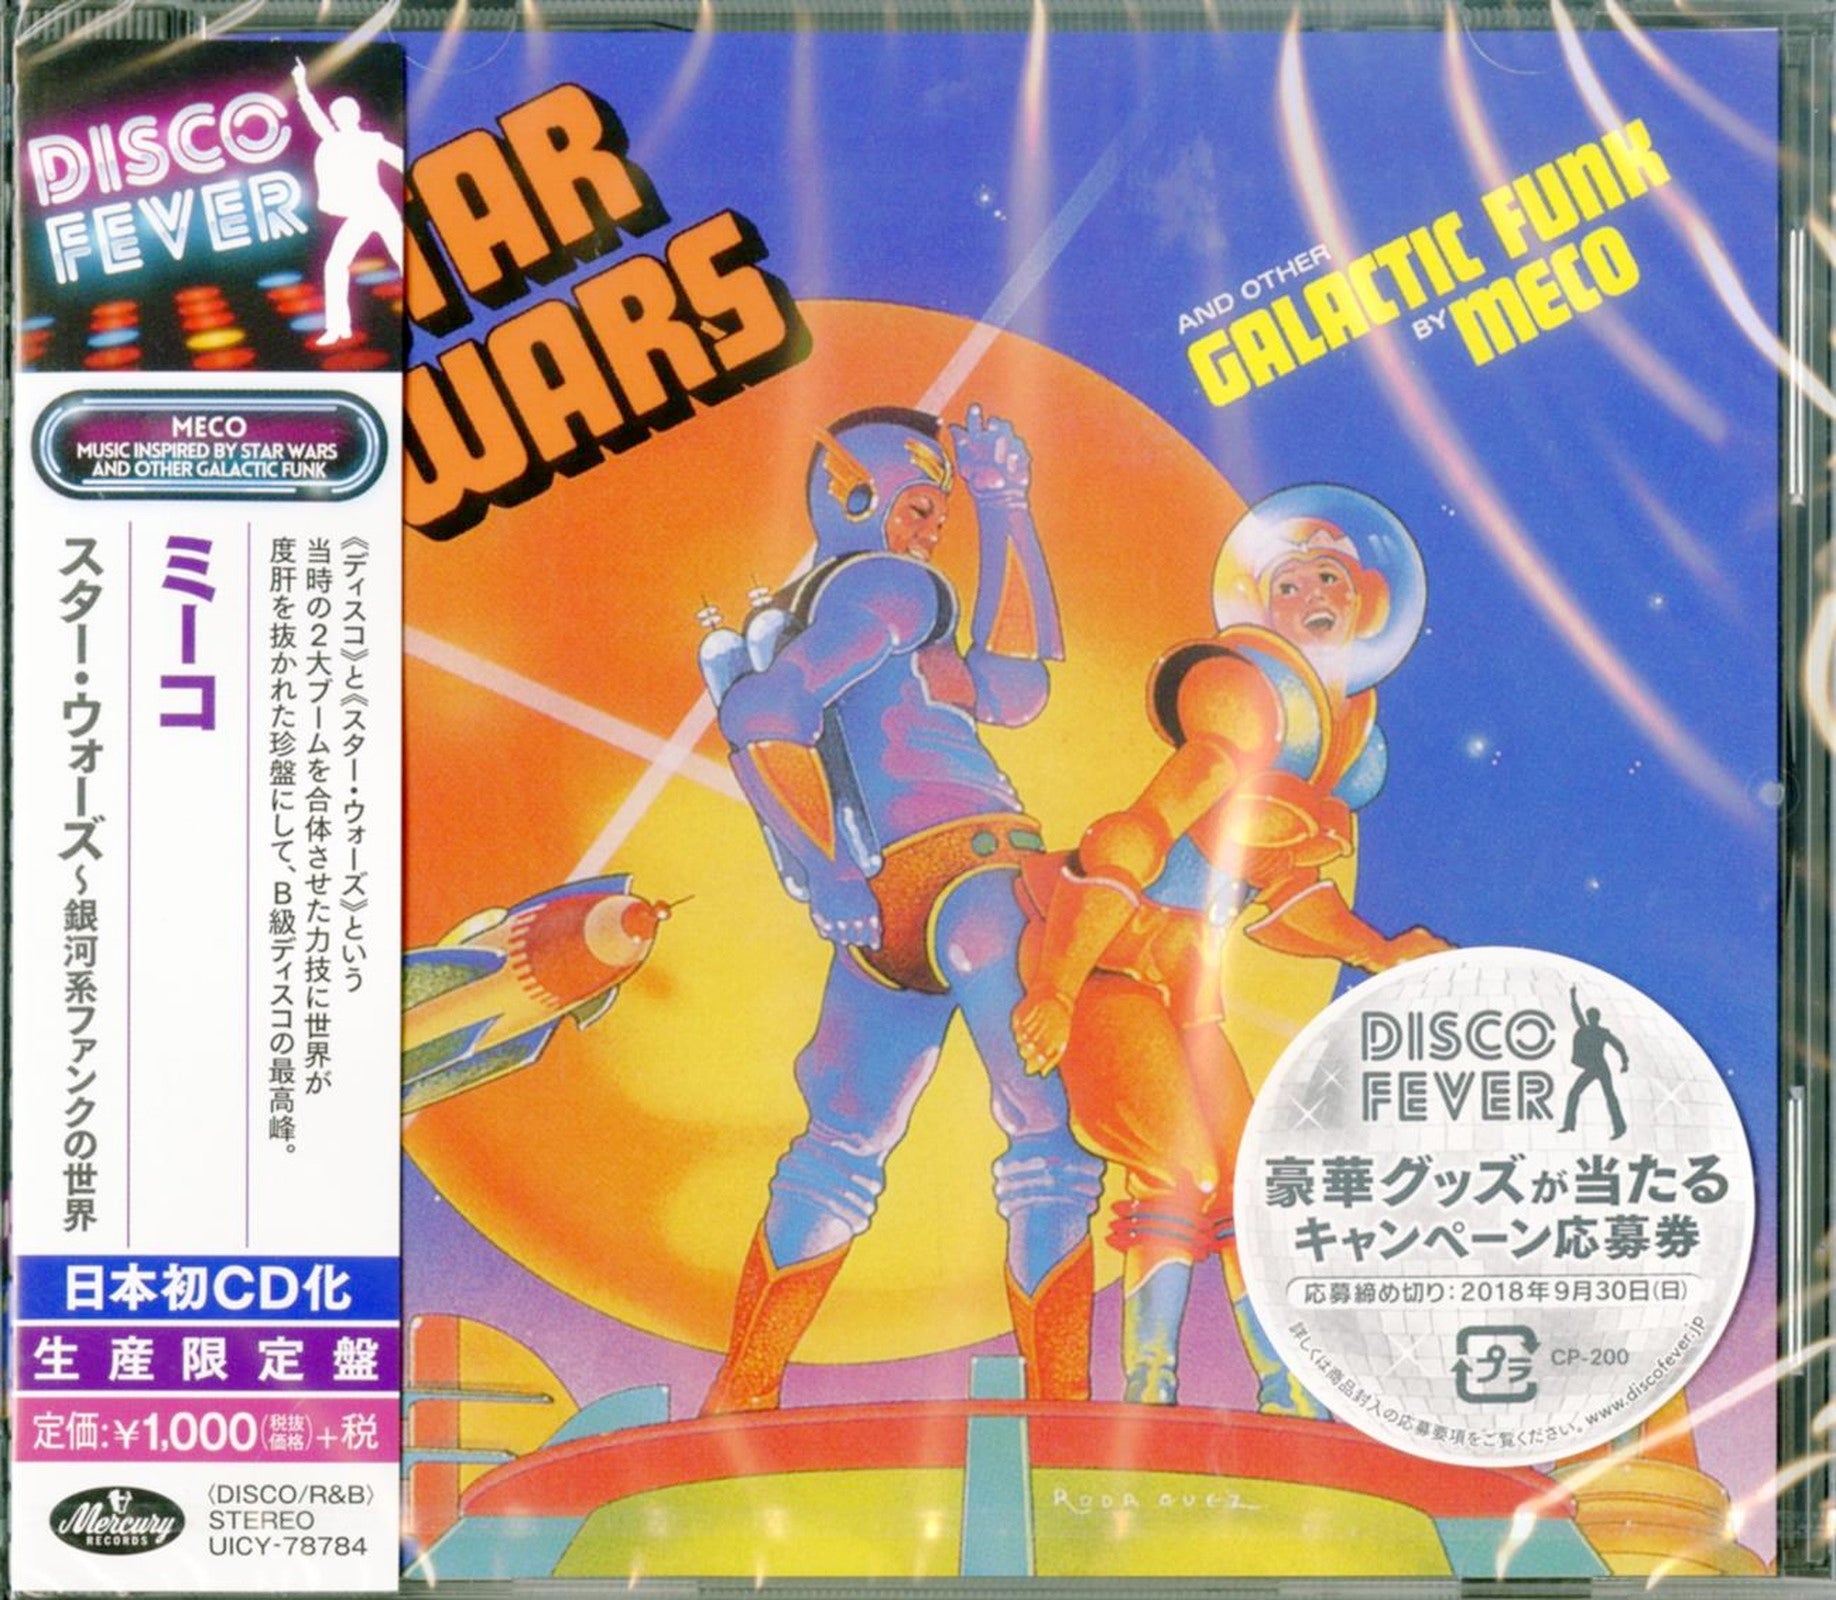 Meco - Music Inspired By Star Wars And Other Galactic Funk - Japan CD – CDs  Vinyl Japan Store CD